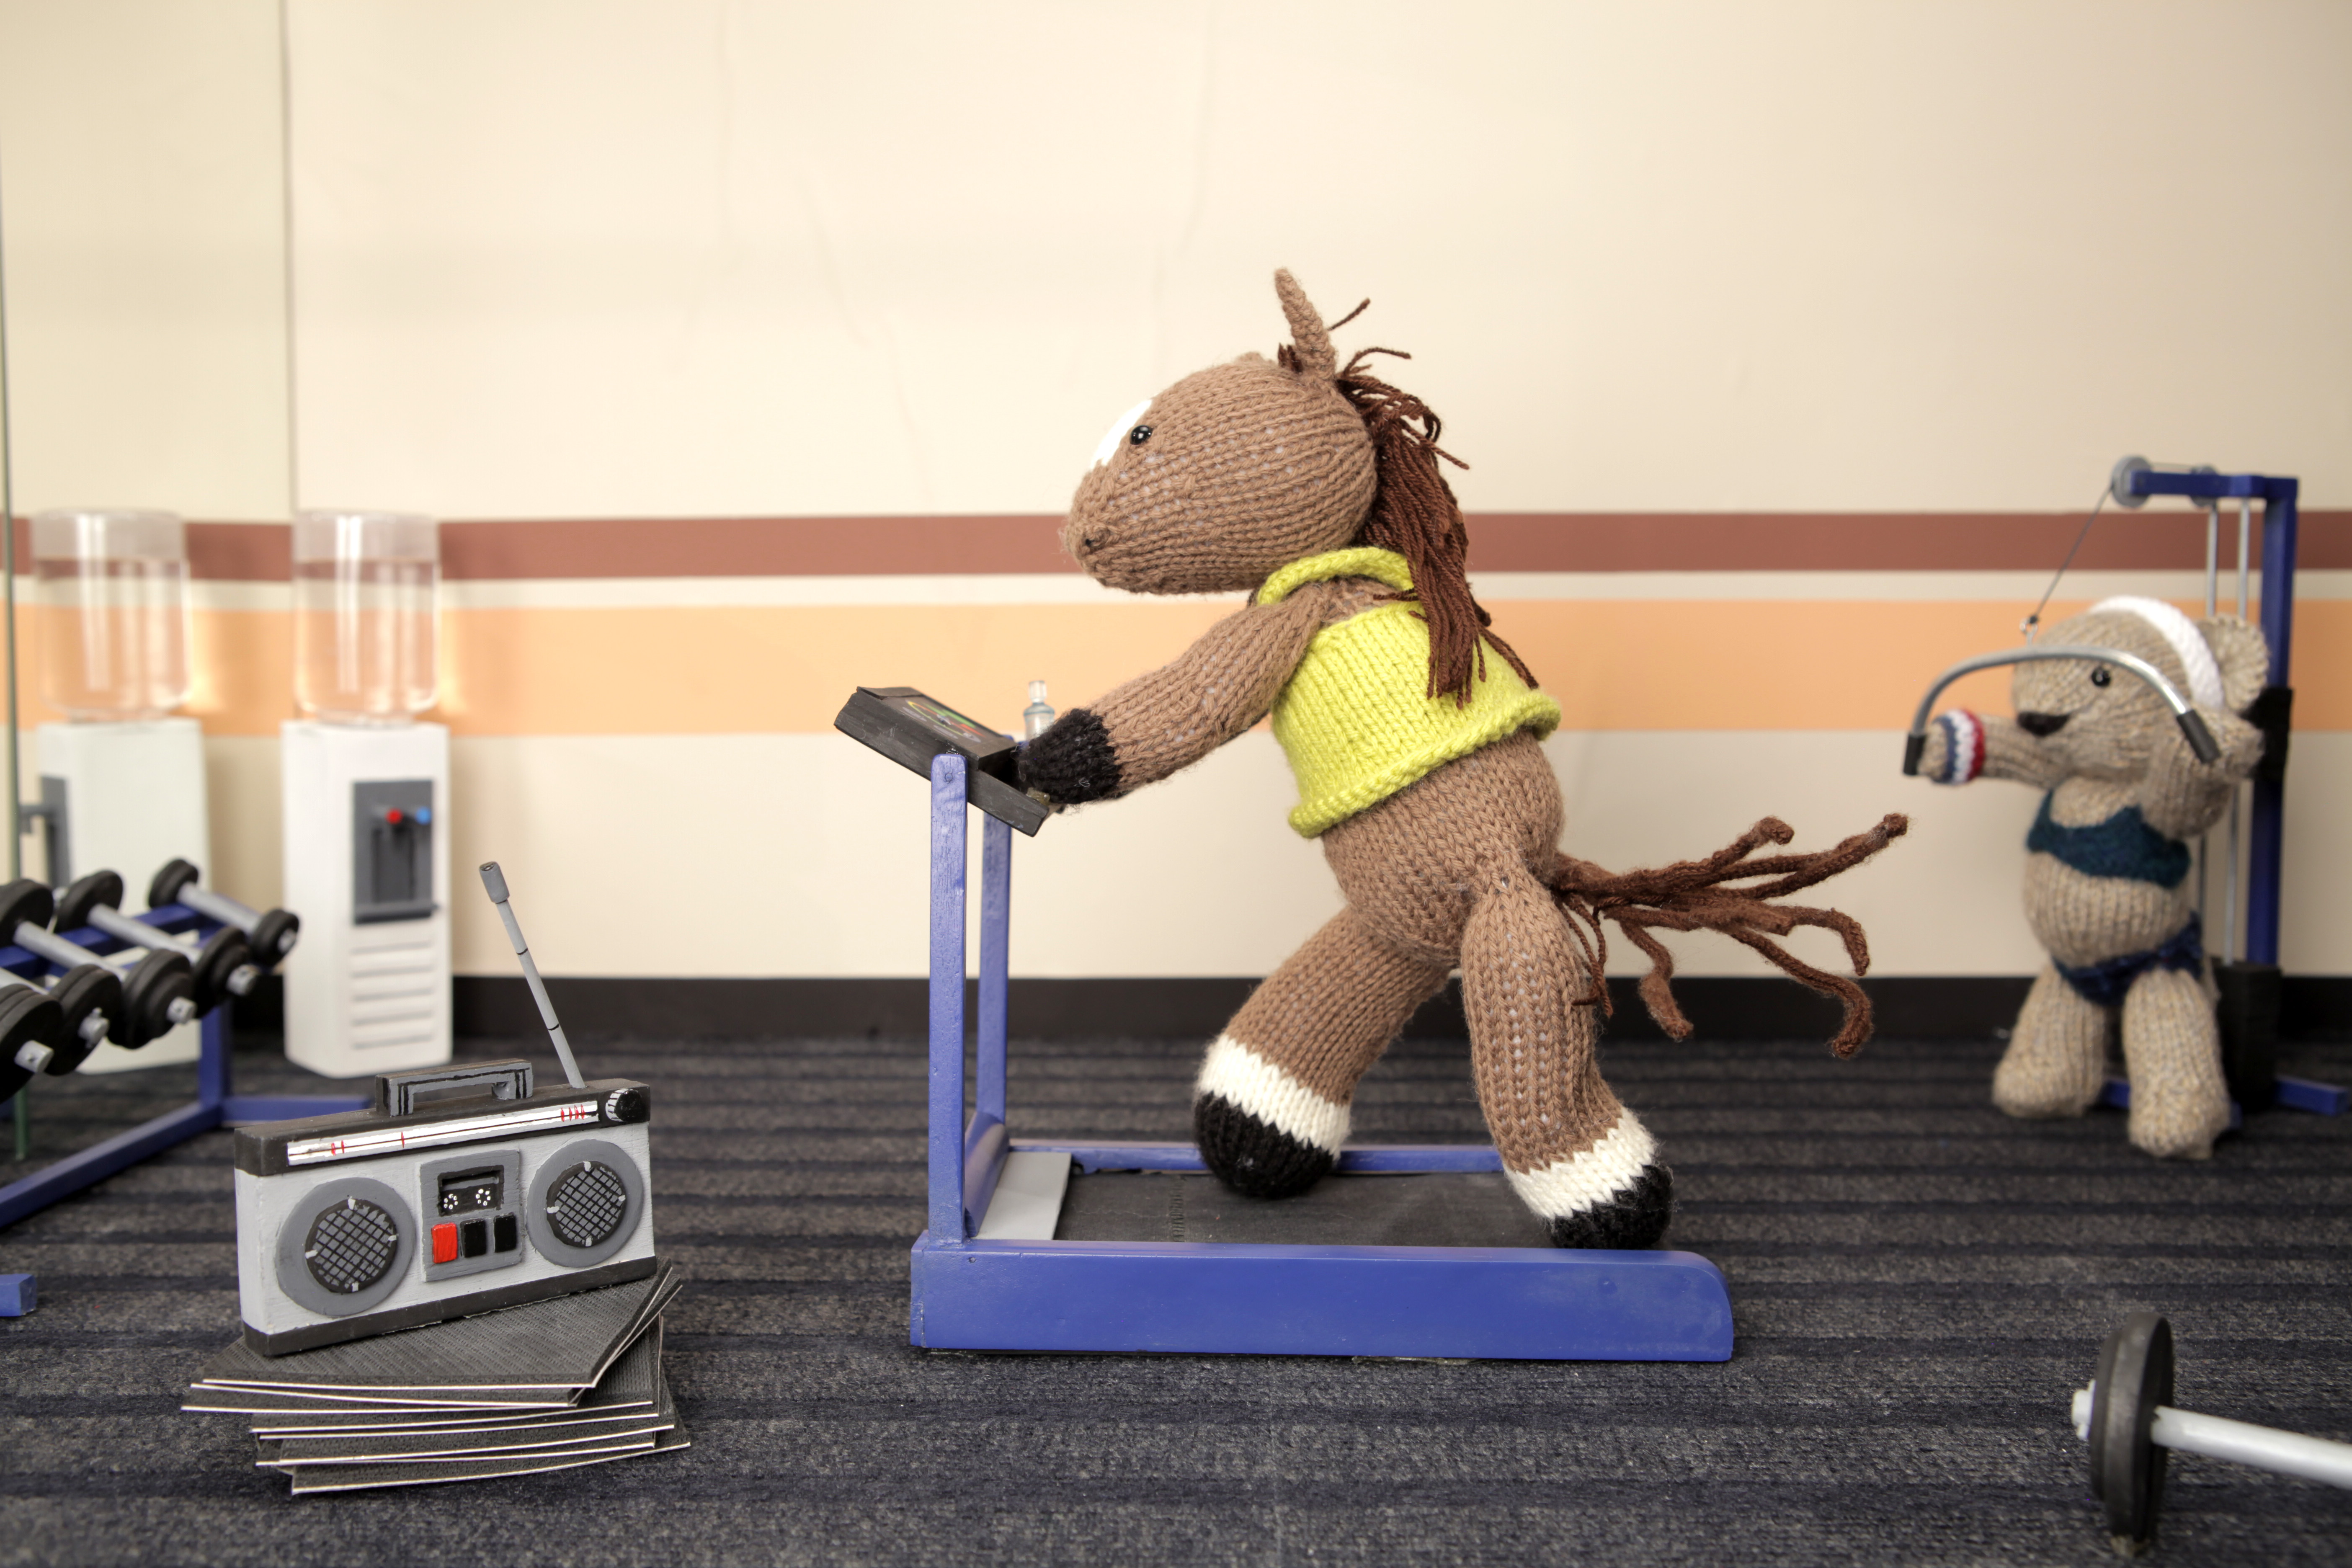 January People: Horse goes to the gym